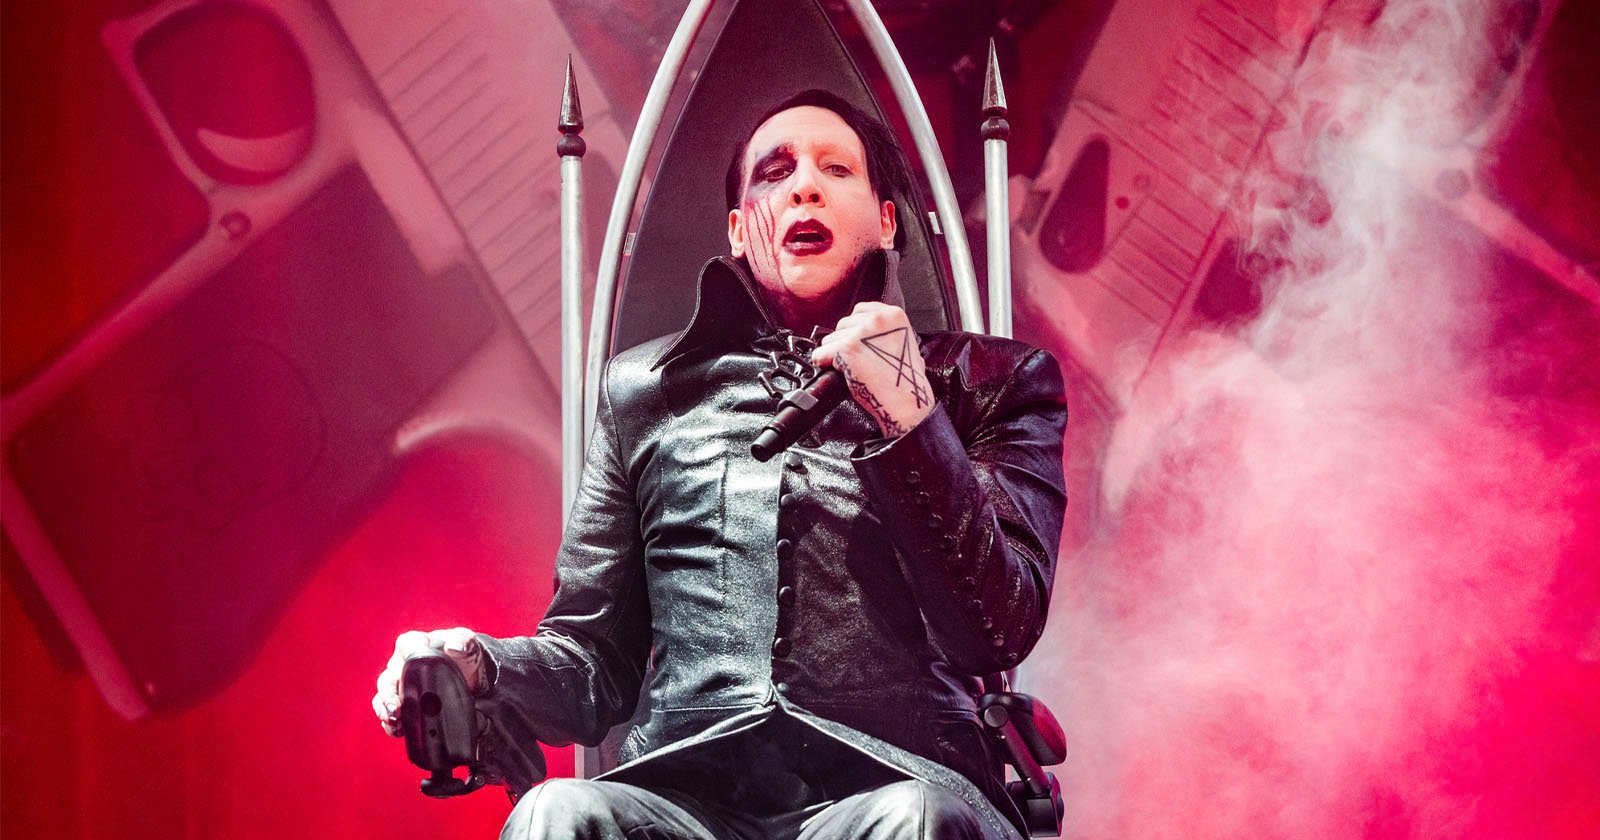 Marilyn Manson Fined for Spitting and Blowing His Nose on Camerawoman